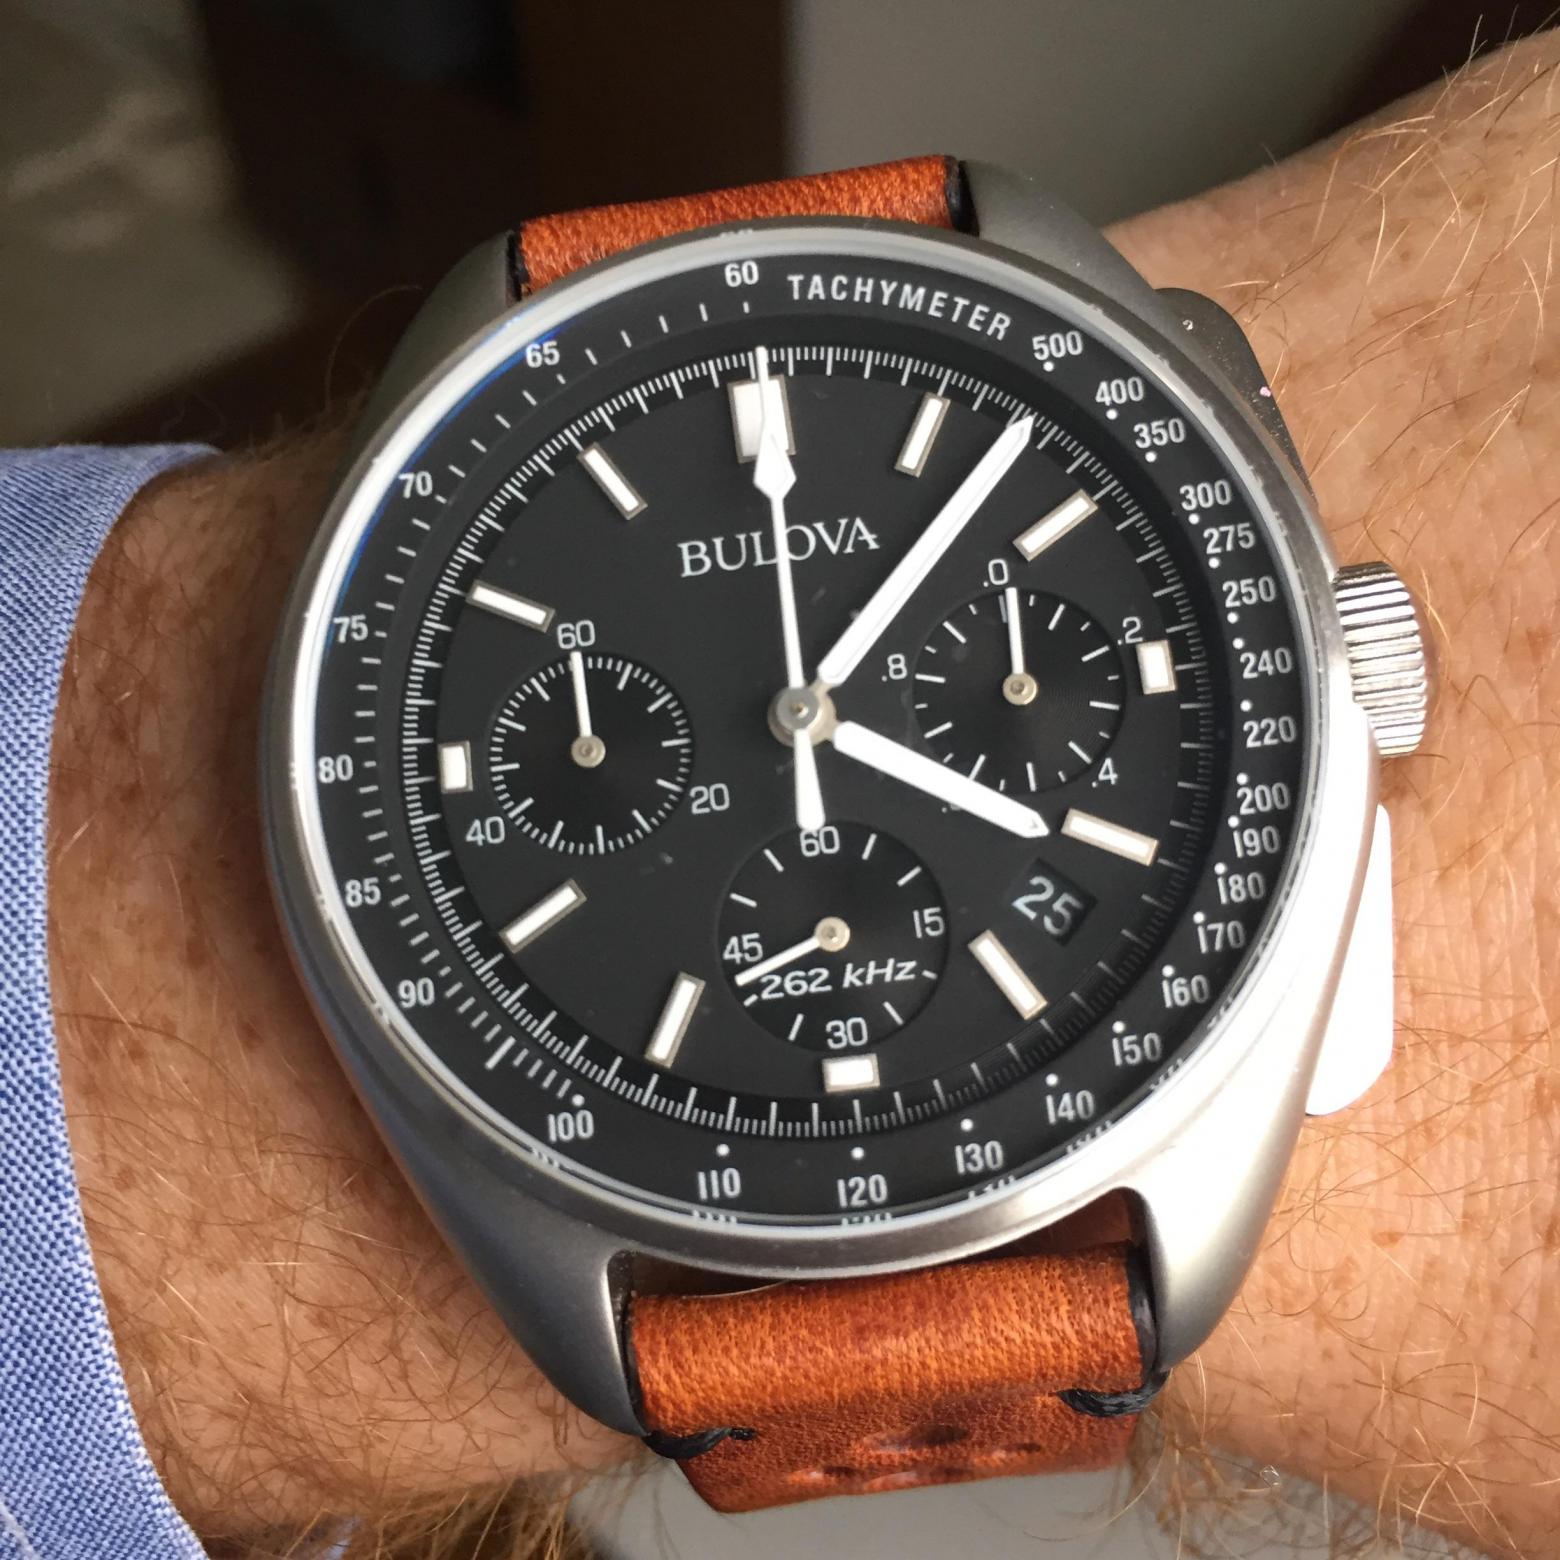 Bulova Moon Watch: More Than Just a Cheaper Alternative to the Speedmaster